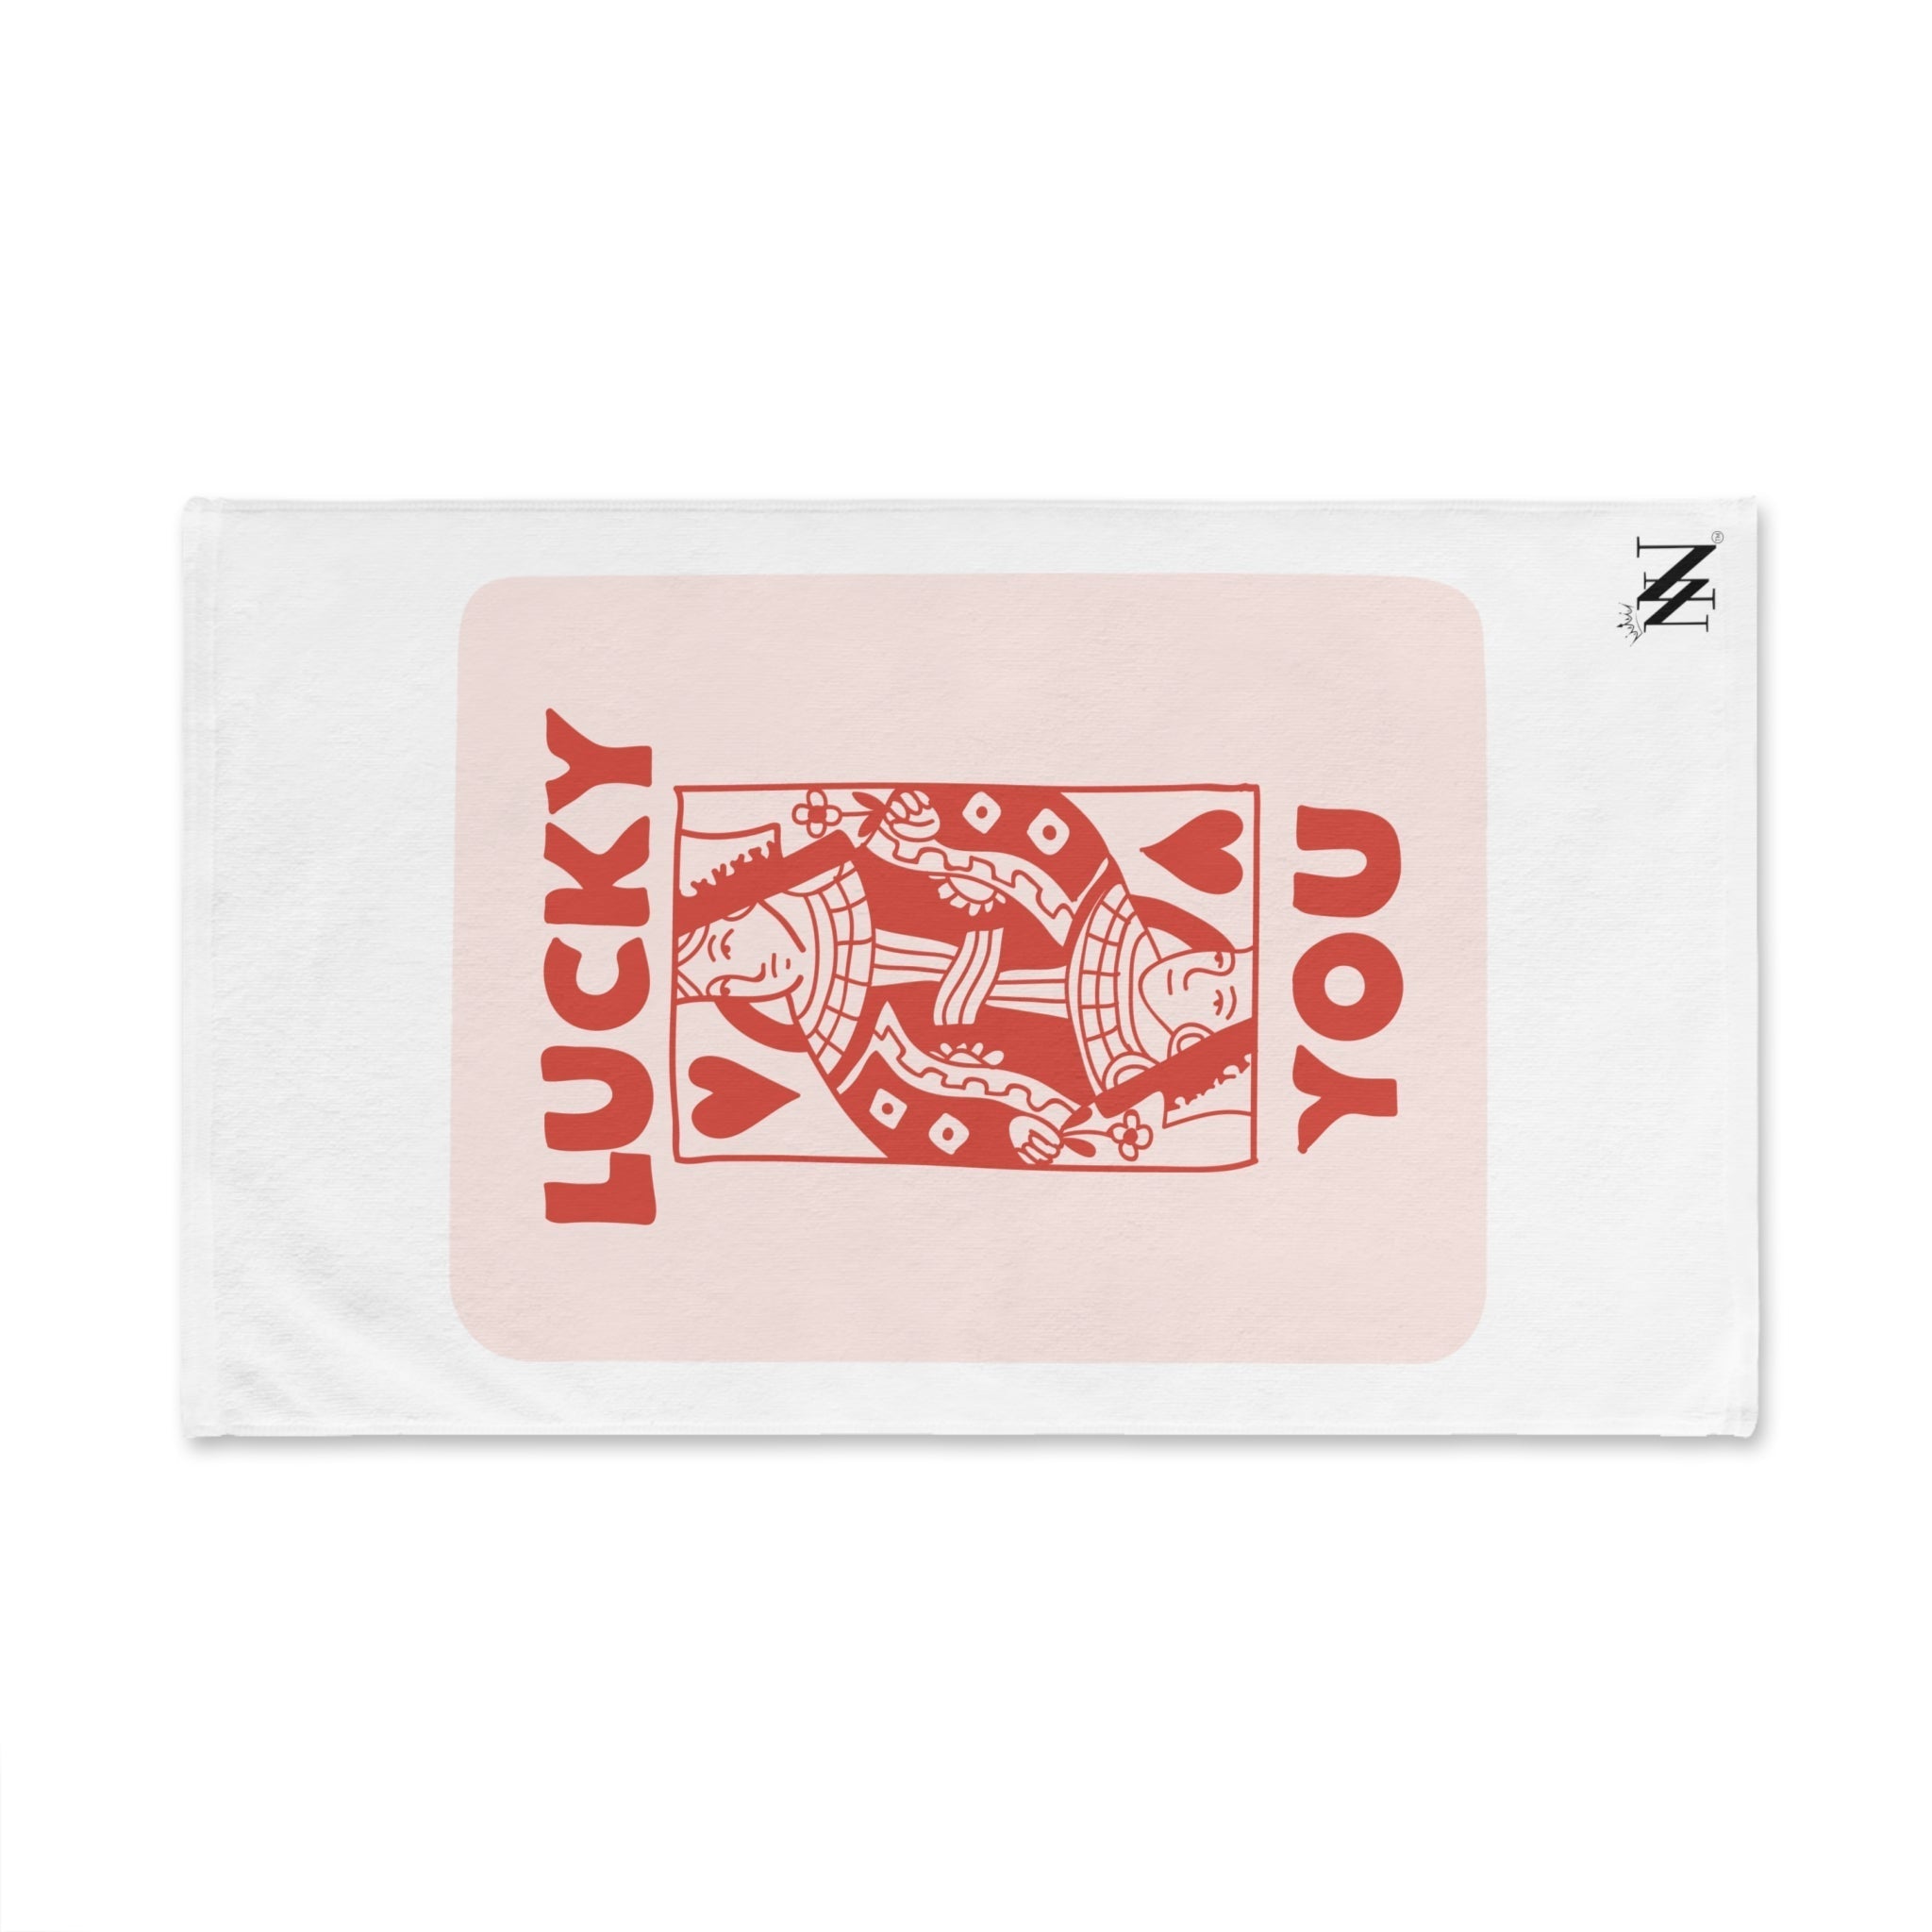 Lucky You Card White | Funny Gifts for Men - Gifts for Him - Birthday Gifts for Men, Him, Her, Husband, Boyfriend, Girlfriend, New Couple Gifts, Fathers & Valentines Day Gifts, Christmas Gifts NECTAR NAPKINS